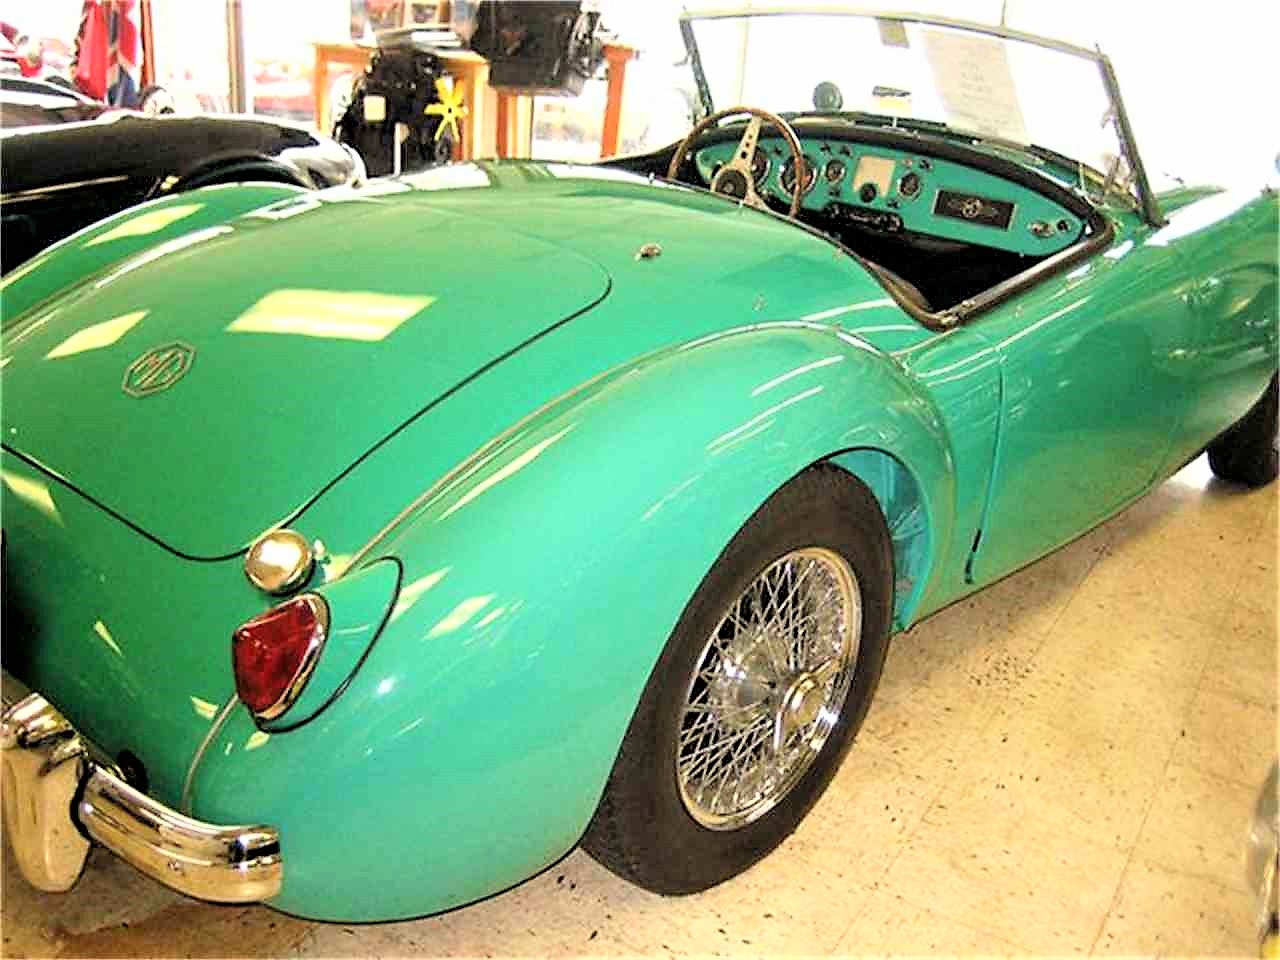 , Rare early color 1956 MGA roadster, ClassicCars.com Journal